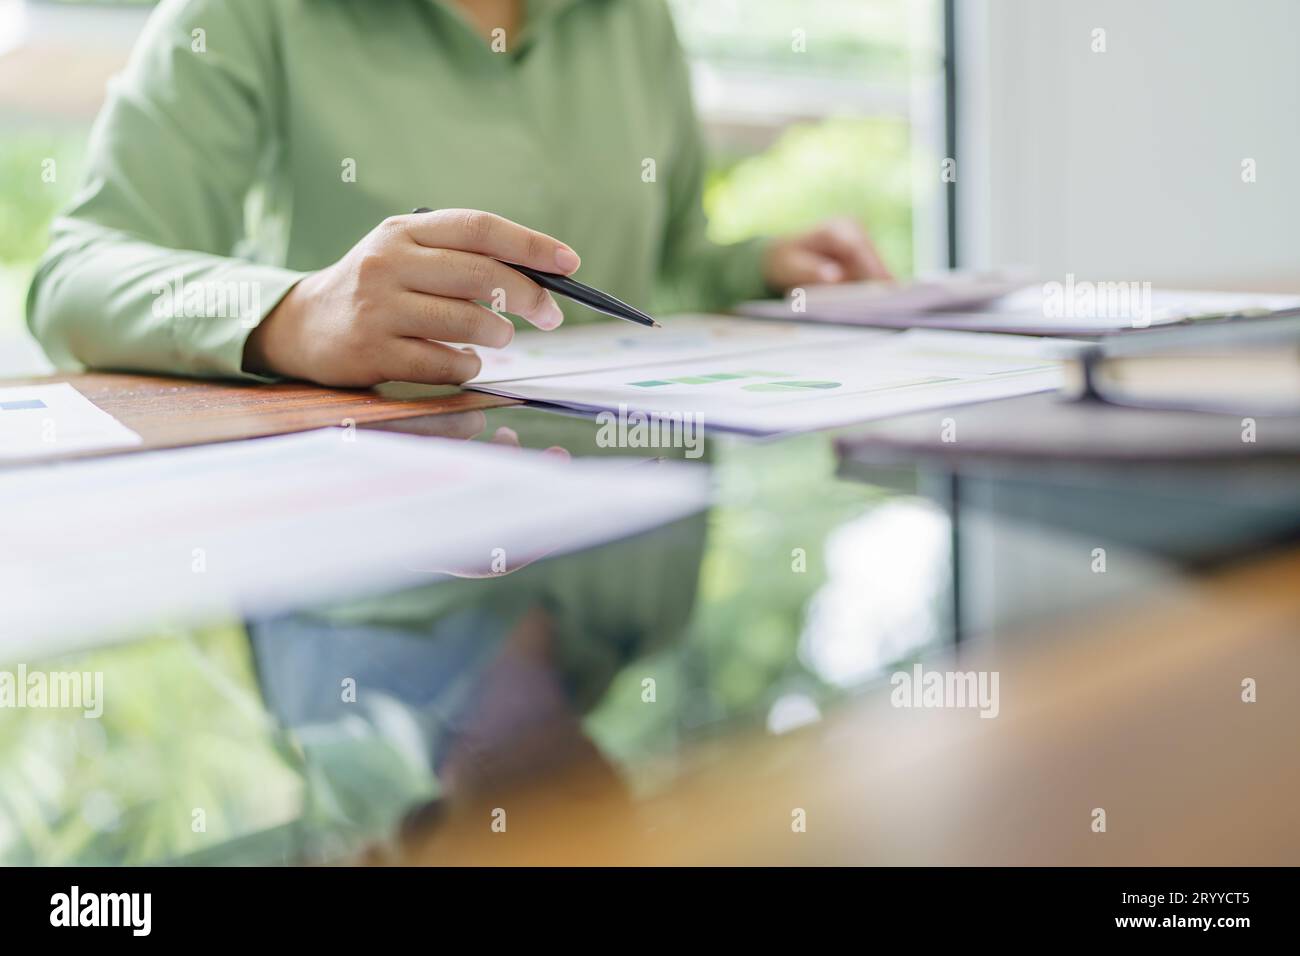 Business woman working in green eco friendly modern working space creative ideas for business eco friendly professional investor Stock Photo